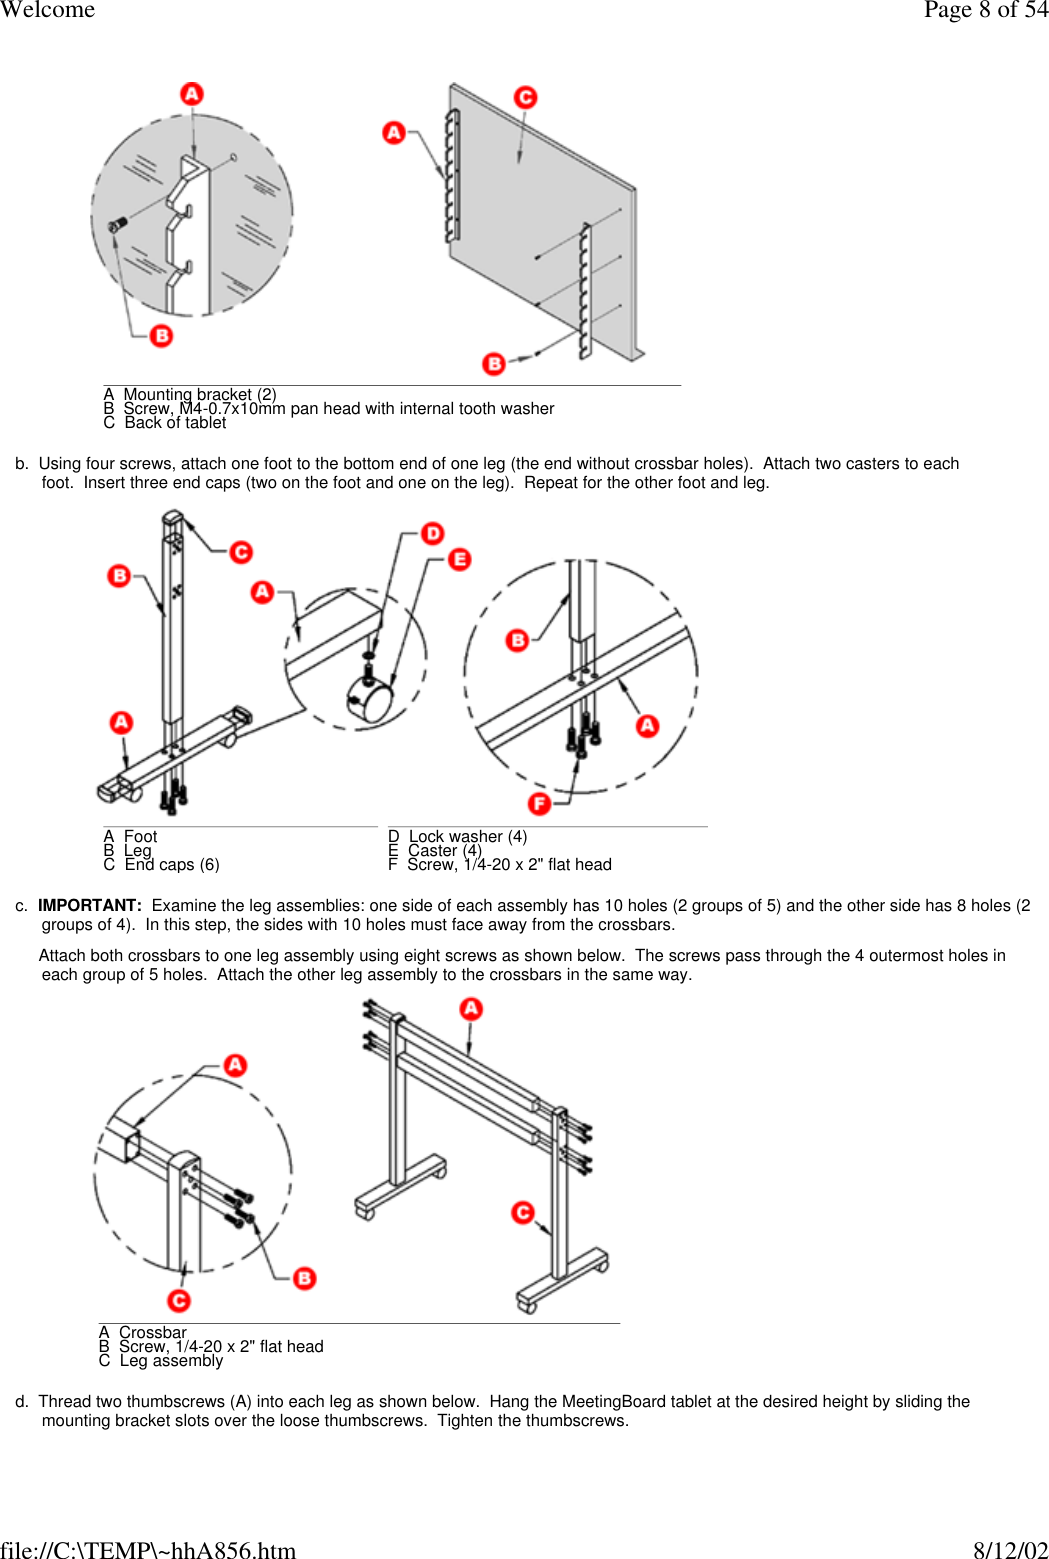 Welcome Page 8 of 54file://C:\TEMP\~hhA856.htm 8/12/02 b.  Using four screws, attach one foot to the bottom end of one leg (the end without crossbar holes).  Attach two casters to each foot.  Insert three end caps (two on the foot and one on the leg).  Repeat for the other foot and leg. c.  IMPORTANT:  Examine the leg assemblies: one side of each assembly has 10 holes (2 groups of 5) and the other side has 8 holes (2 groups of 4).  In this step, the sides with 10 holes must face away from the crossbars.     Attach both crossbars to one leg assembly using eight screws as shown below.  The screws pass through the 4 outermost holes in each group of 5 holes.  Attach the other leg assembly to the crossbars in the same way. d.  Thread two thumbscrews (A) into each leg as shown below.  Hang the MeetingBoard tablet at the desired height by sliding the mounting bracket slots over the loose thumbscrews.  Tighten the thumbscrews. A  Mounting bracket (2)B  Screw, M4-0.7x10mm pan head with internal tooth washerC  Back of tablet A  Foot      B  Leg      C  End caps (6)      D  Lock washer (4)E  Caster (4)F  Screw, 1/4-20 x 2&quot; flat head A  CrossbarB  Screw, 1/4-20 x 2&quot; flat headC  Leg assembly